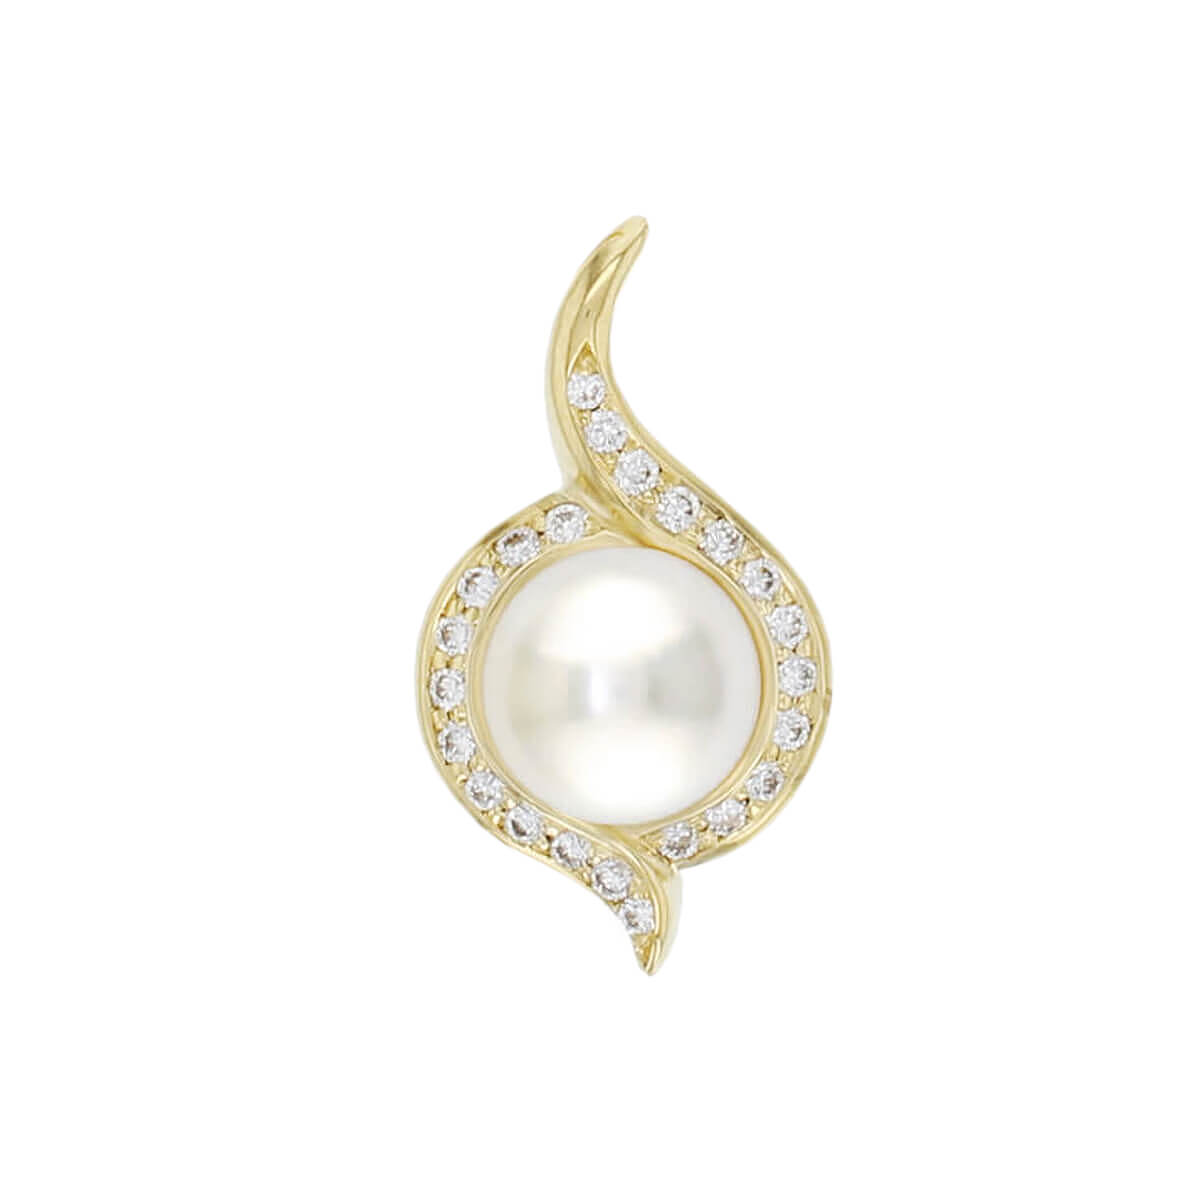 6- 6.5mm Akoya cultured saltwater pearl diamond halo 18ct yellow gold pendant with chain,18kt, designer, handmade by Faller, Derry/ Londonderry, hand crafted, precious jewellery, jewelry